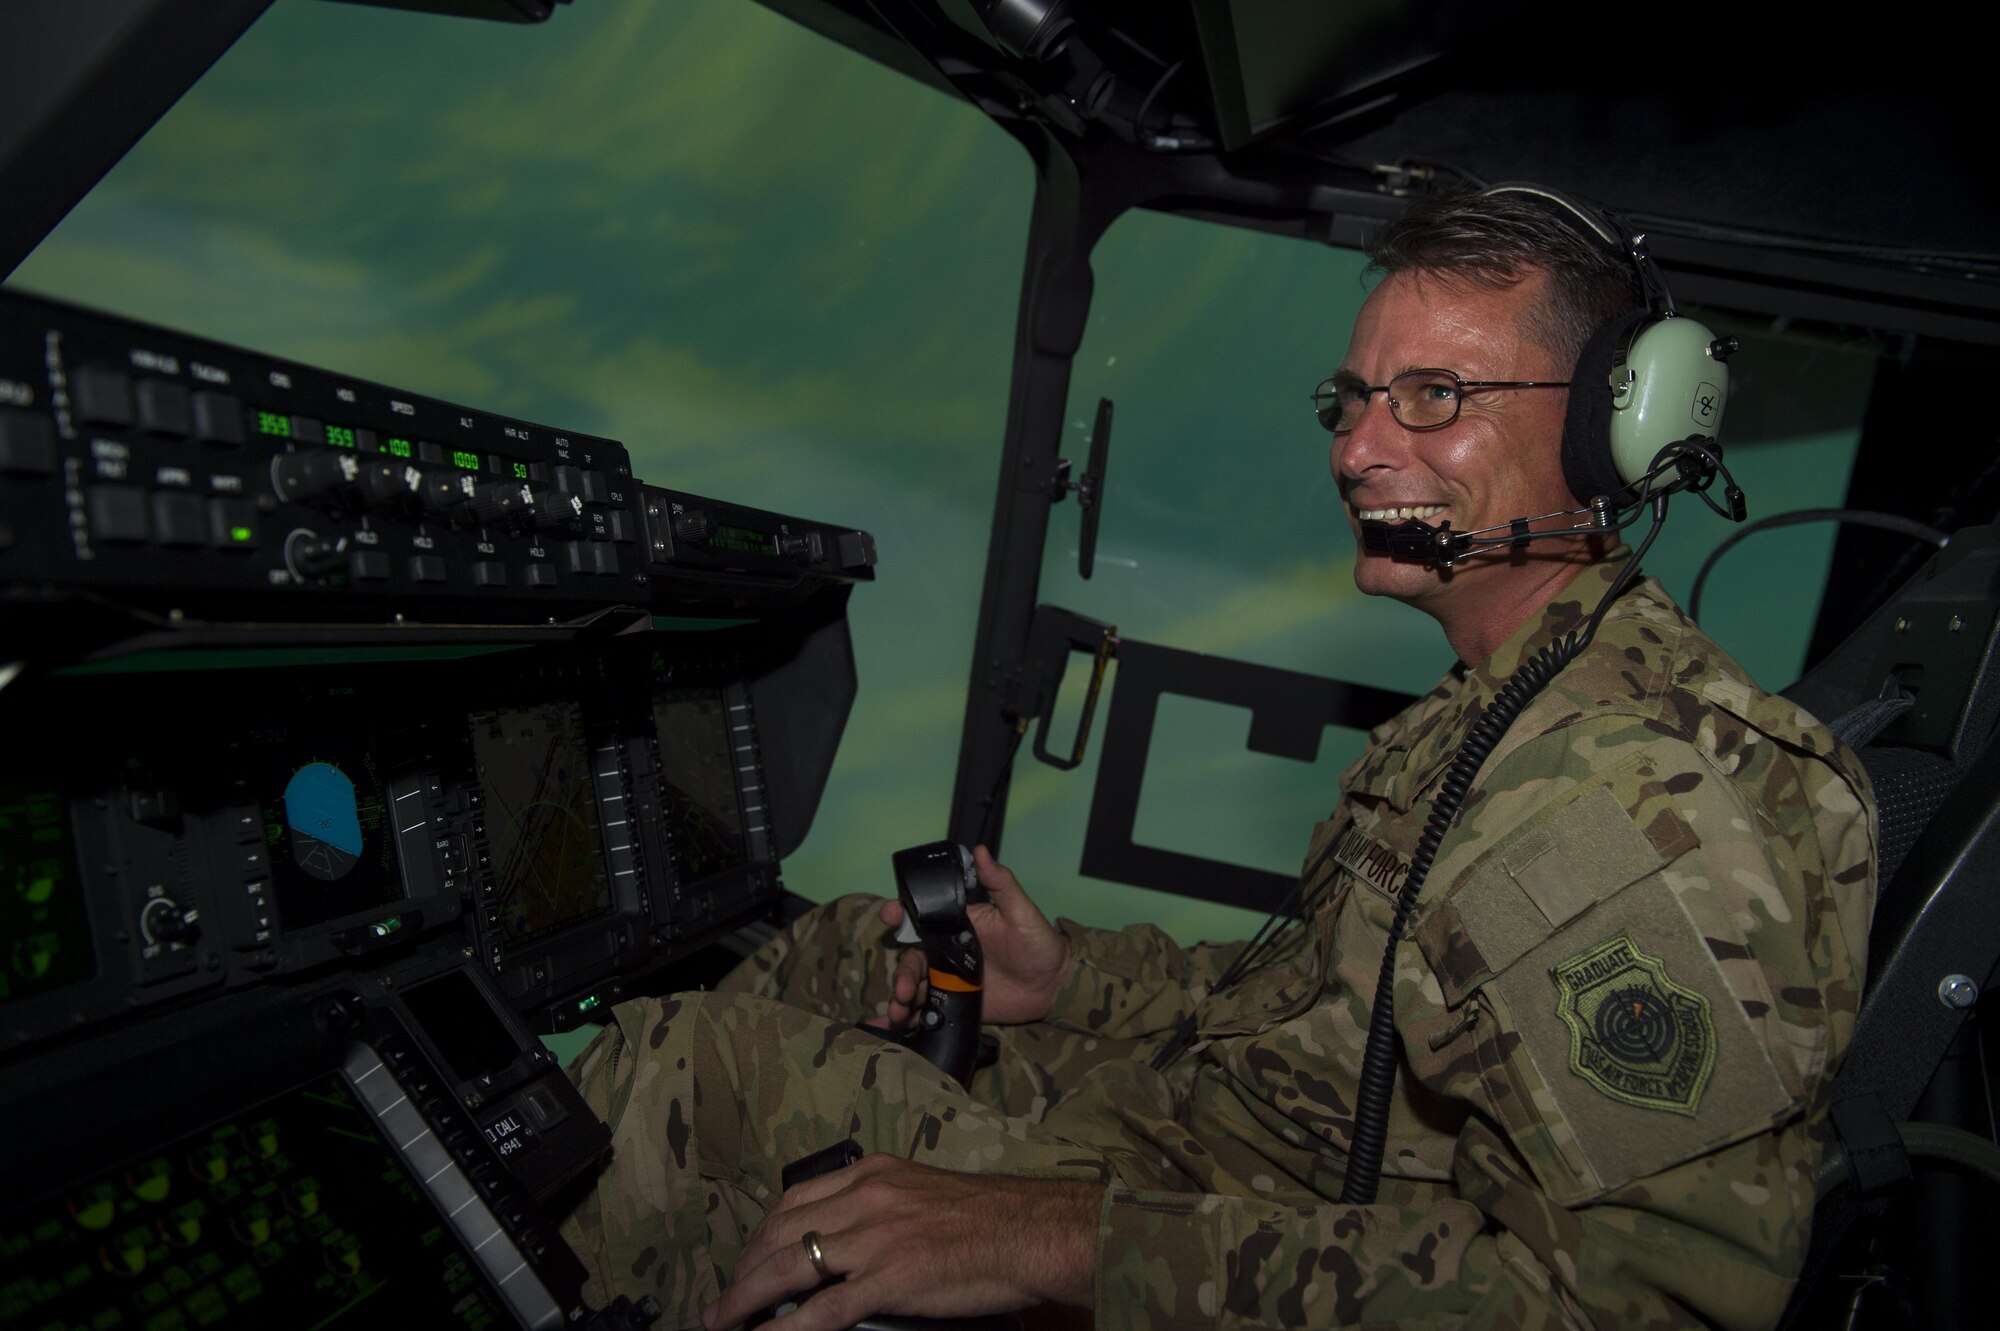 Col. Tom Palenske, vice commander of the 1st Special Operations Wing, completes a check ride in a CV-22 Osprey training simulator at Hurlburt Field, Fla., June 8, 2016. Palenske took command of the 1st SOW during a change of command ceremony here, June 10, 2016. (U.S. Air Force Photo by Airman 1st Class Kai White)